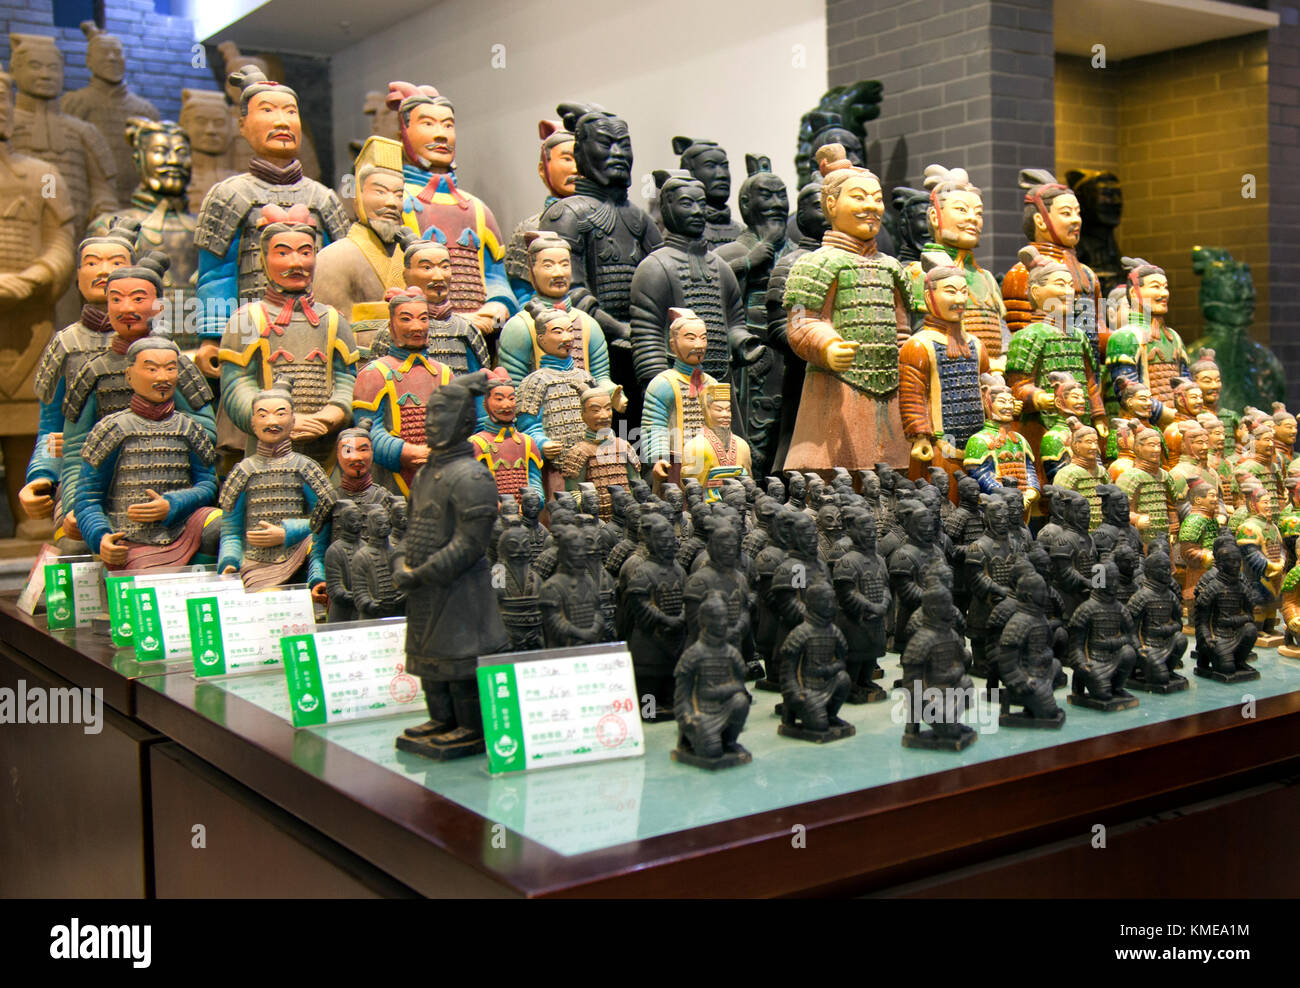 Catapulted into international tourism with the 1974 discovery of fields of buried life-size terracotta warriors,Xi'an today caters to a huge tourist trade with souvenir statues such as these,on sale in a state-run store.Xian is the capital of Shaanxi Province,People's Republic of China.It is the oldest of the Four Great Ancient Capitals,having held the position under several of the most important dynasties in Chinese history,including Western Zhou,Qin,Western Han,Sui,and Tang.Xi'an is the starting point of the Silk Road Stock Photo